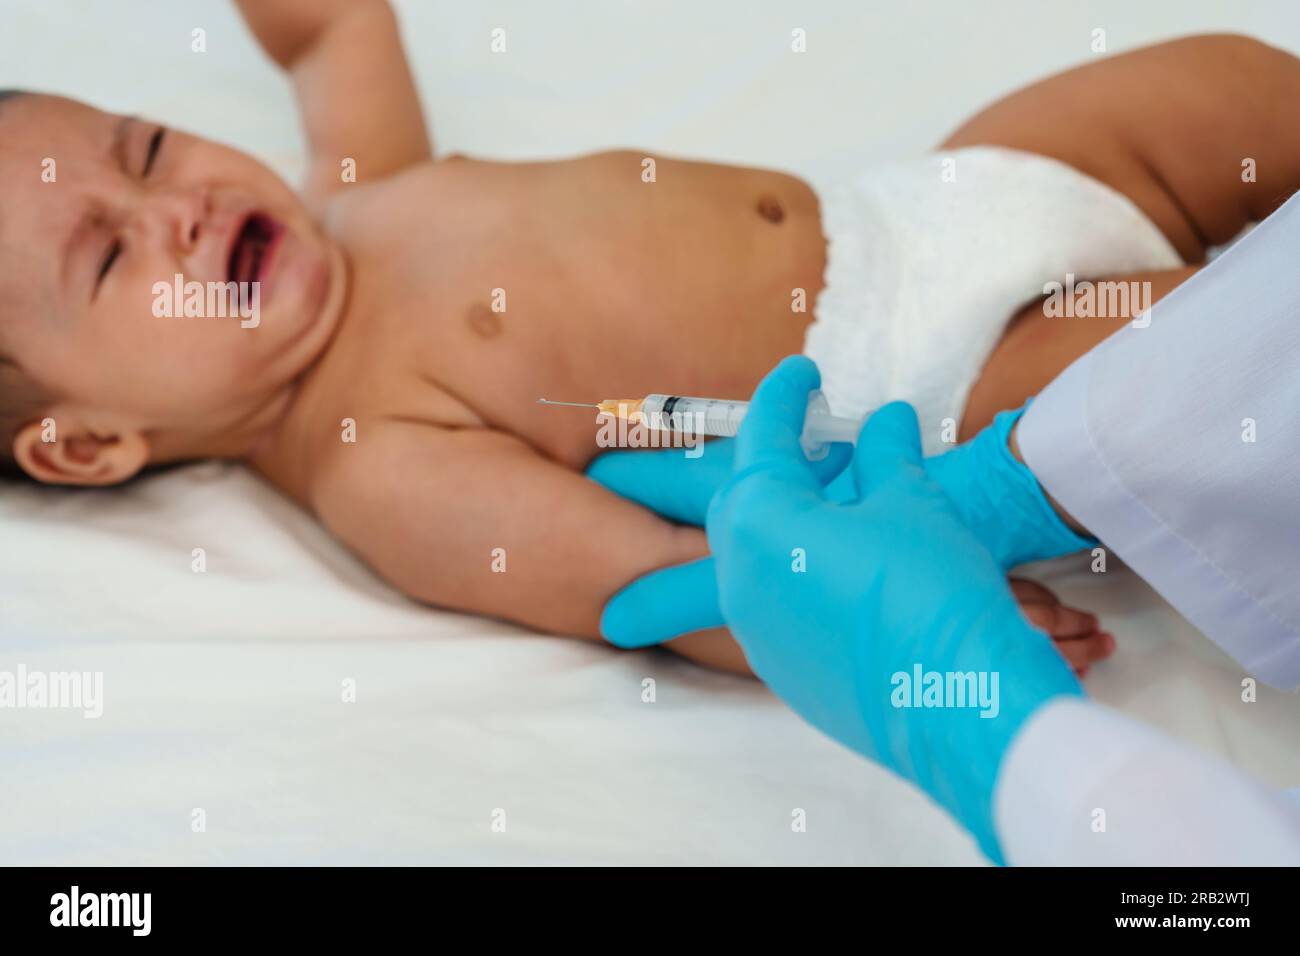 doctor holding syringe and preparing vaccine giving injection to arm of crying infant baby Stock Photo